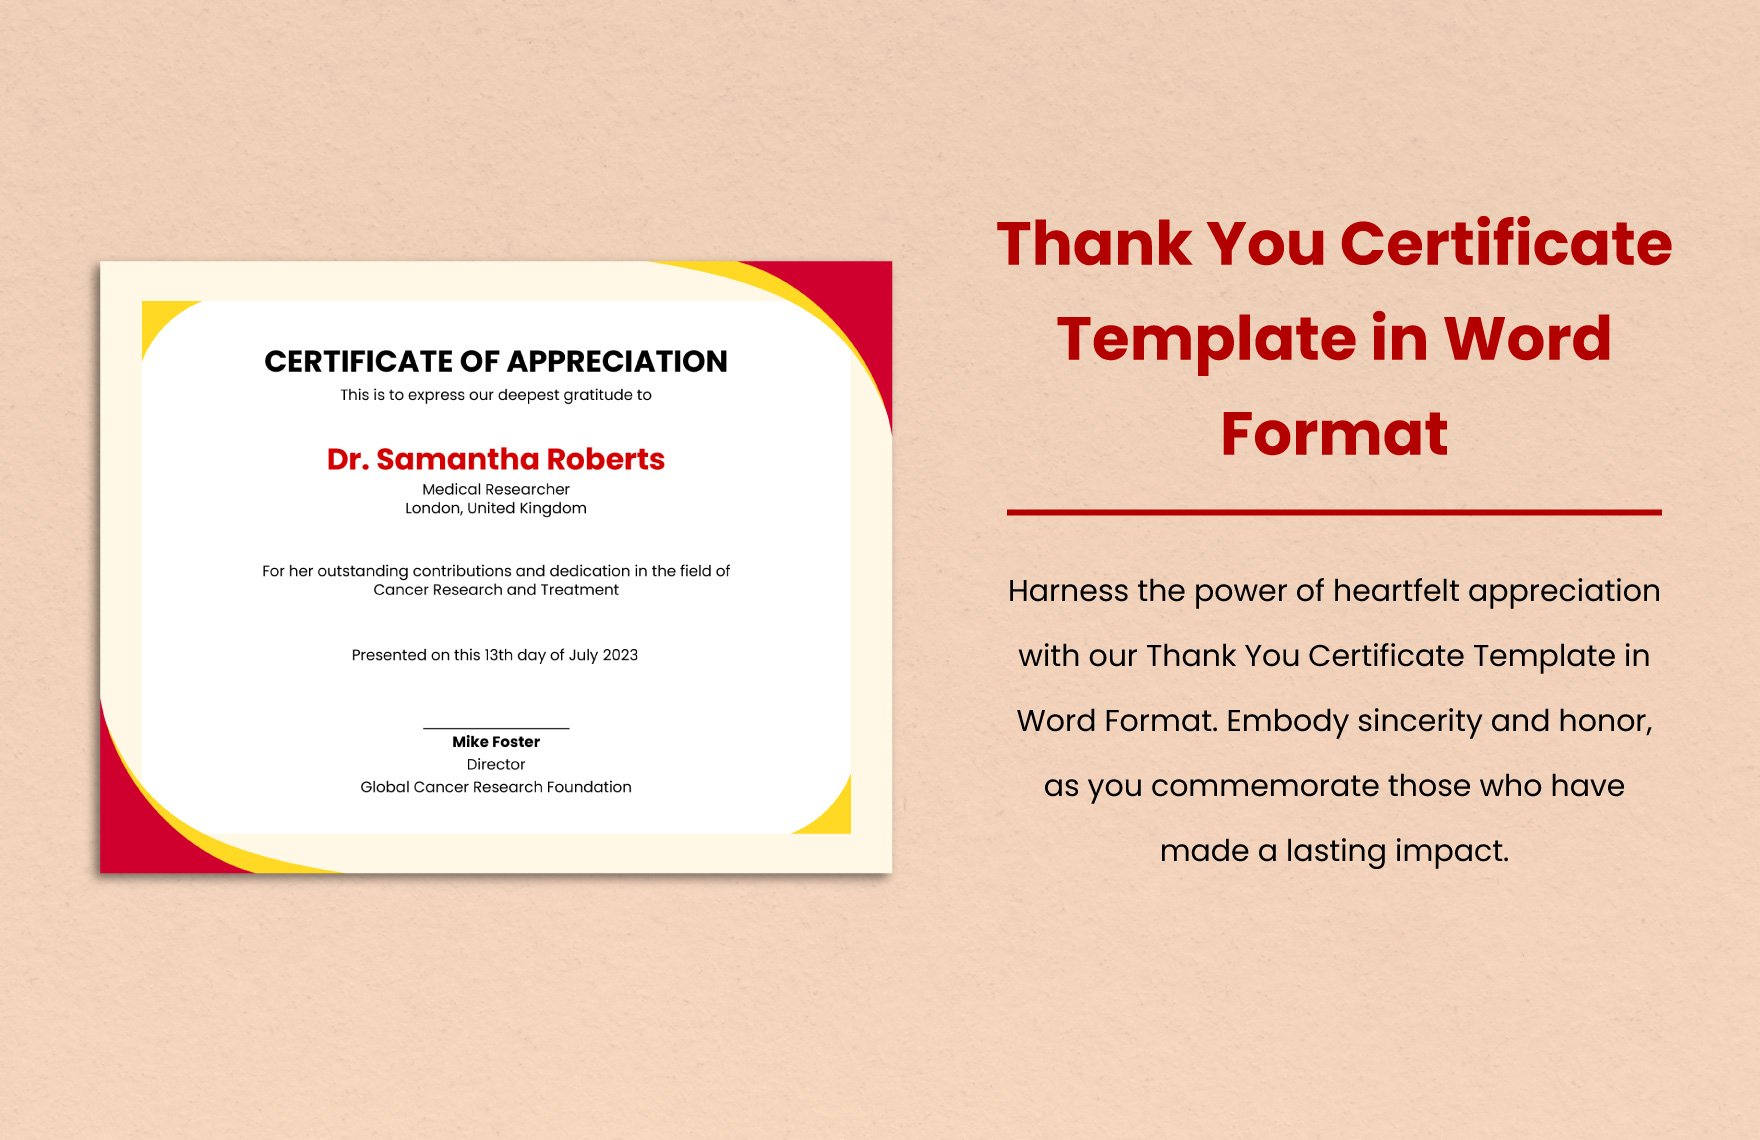 Thank You Certificate Template in Word Format